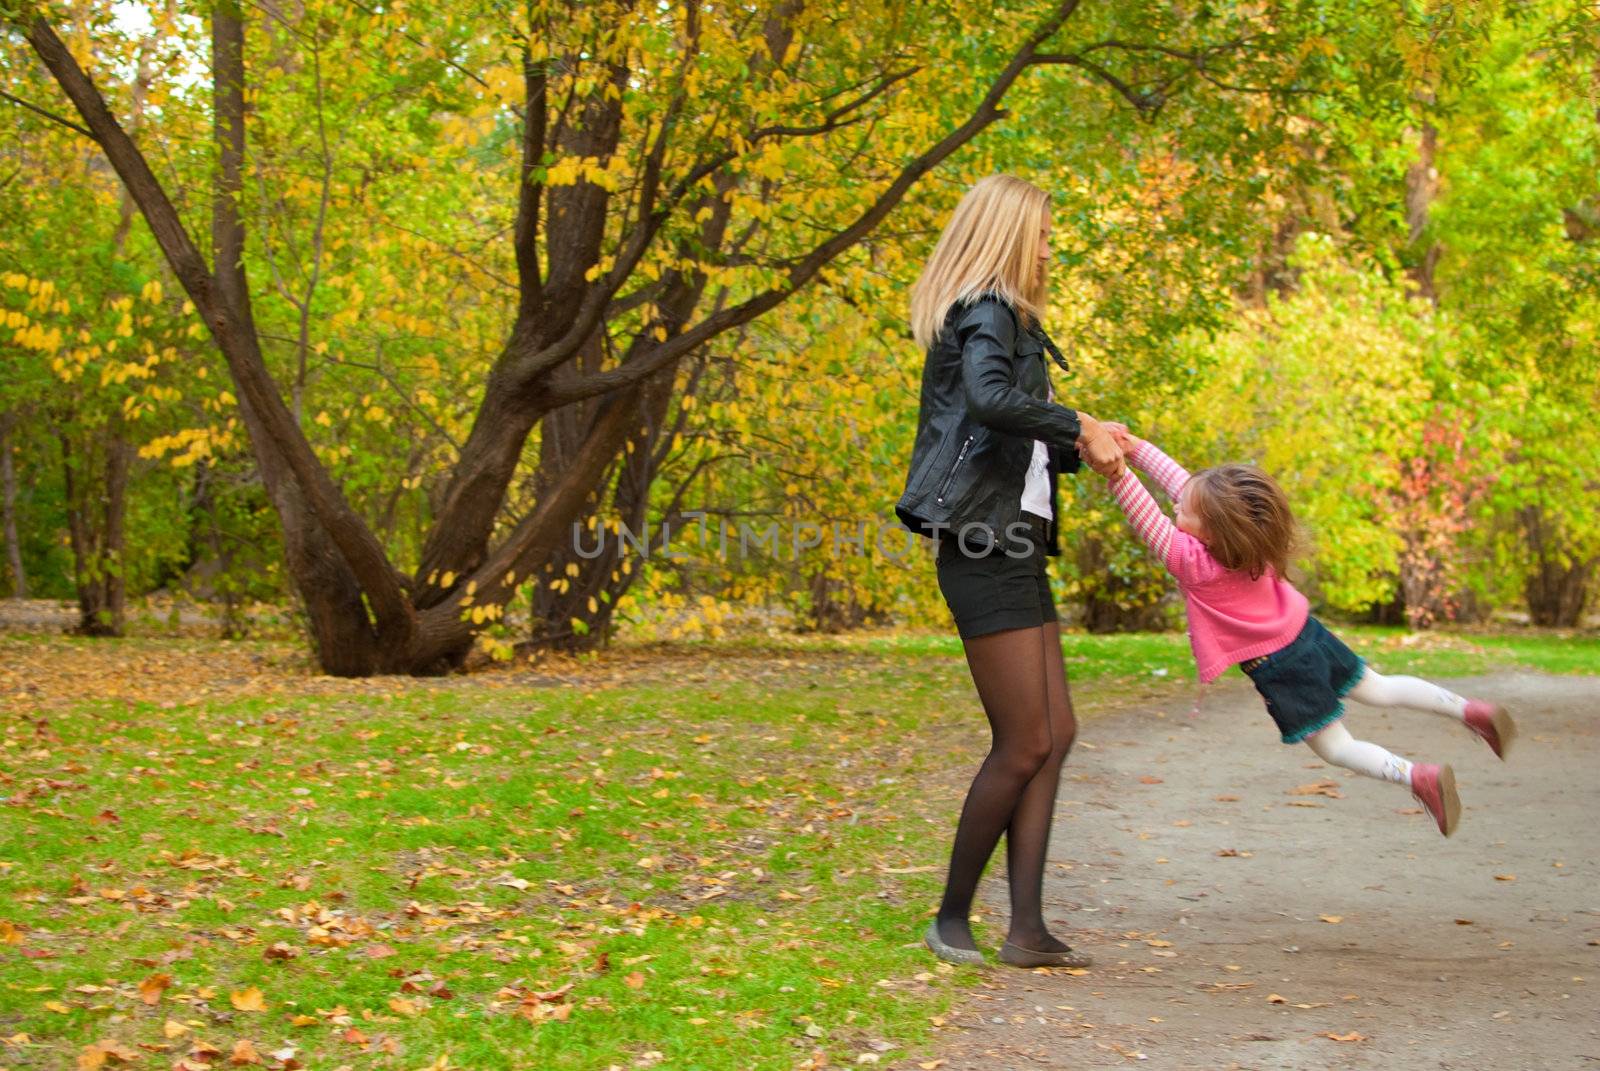 Mom is spining around with her daughter (3 years old) in autumn park.